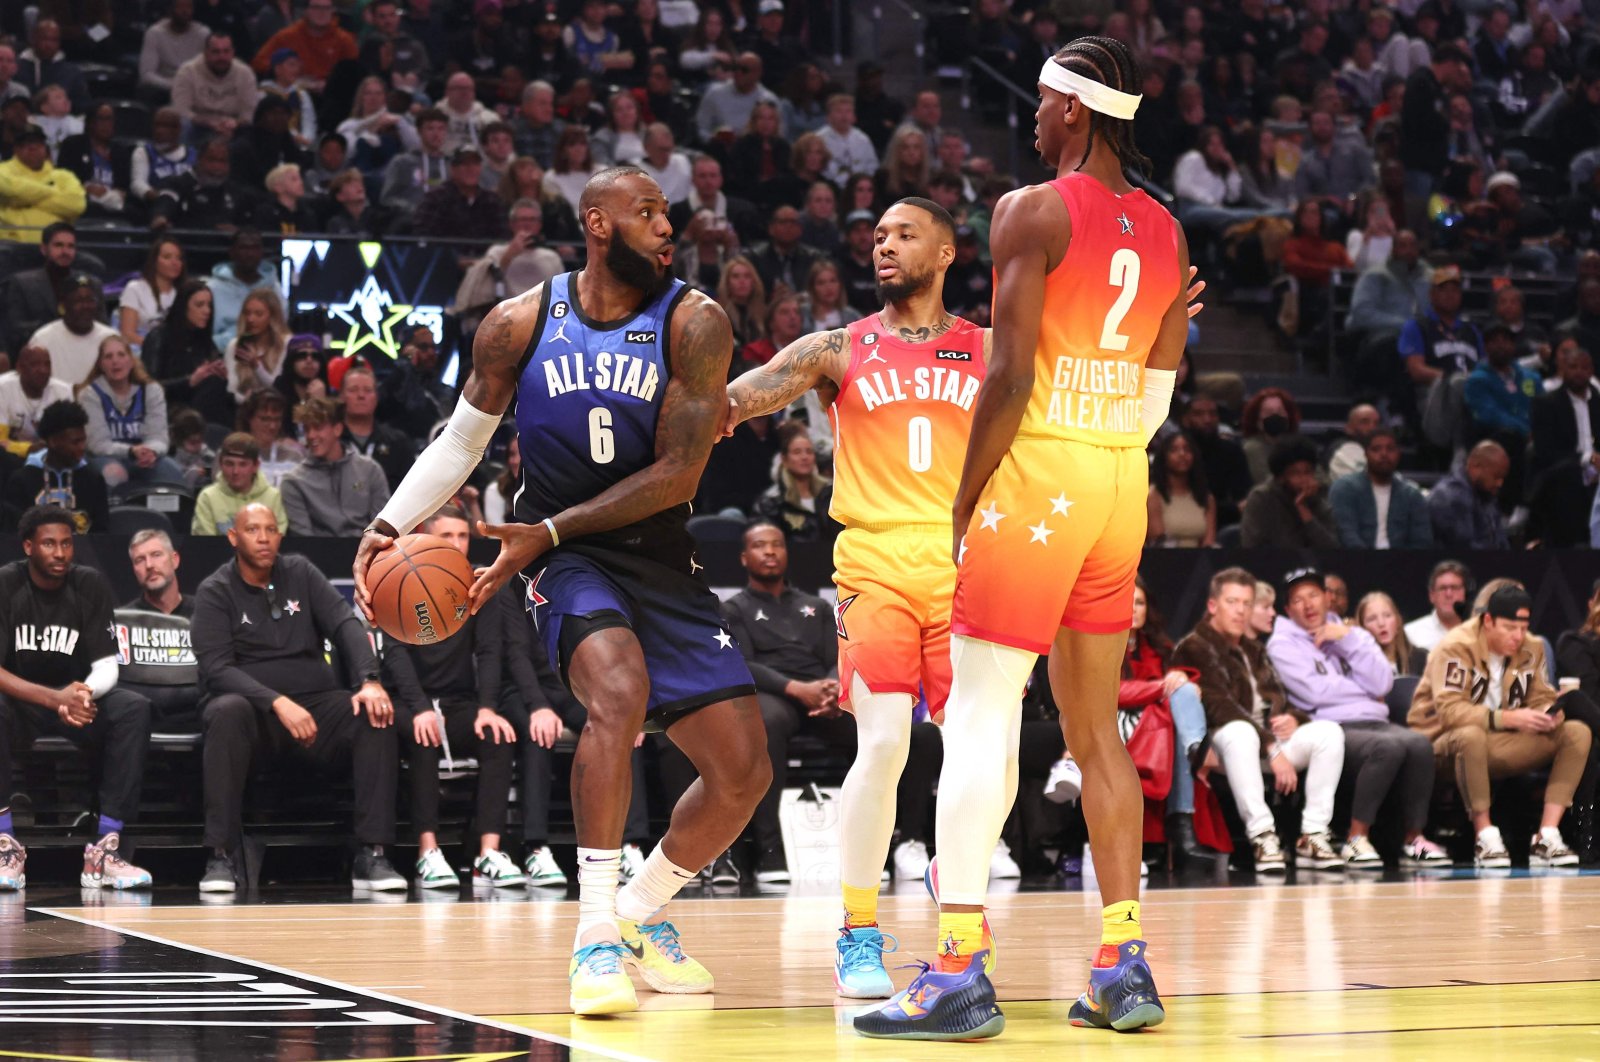 Los Angeles Lakers&#039; LeBron James (L) is pressured by Portland Trailblazers&#039; Damian Lillard (C) and Oklahoma City Thunder&#039;s Shai Gilgeous-Alexander (R) during the 2023 NBA All Star Game between Team Giannis and Team LeBron at Vivint Arena, Salt Lake City, US., Feb. 19, 2023. (AFP Photo)